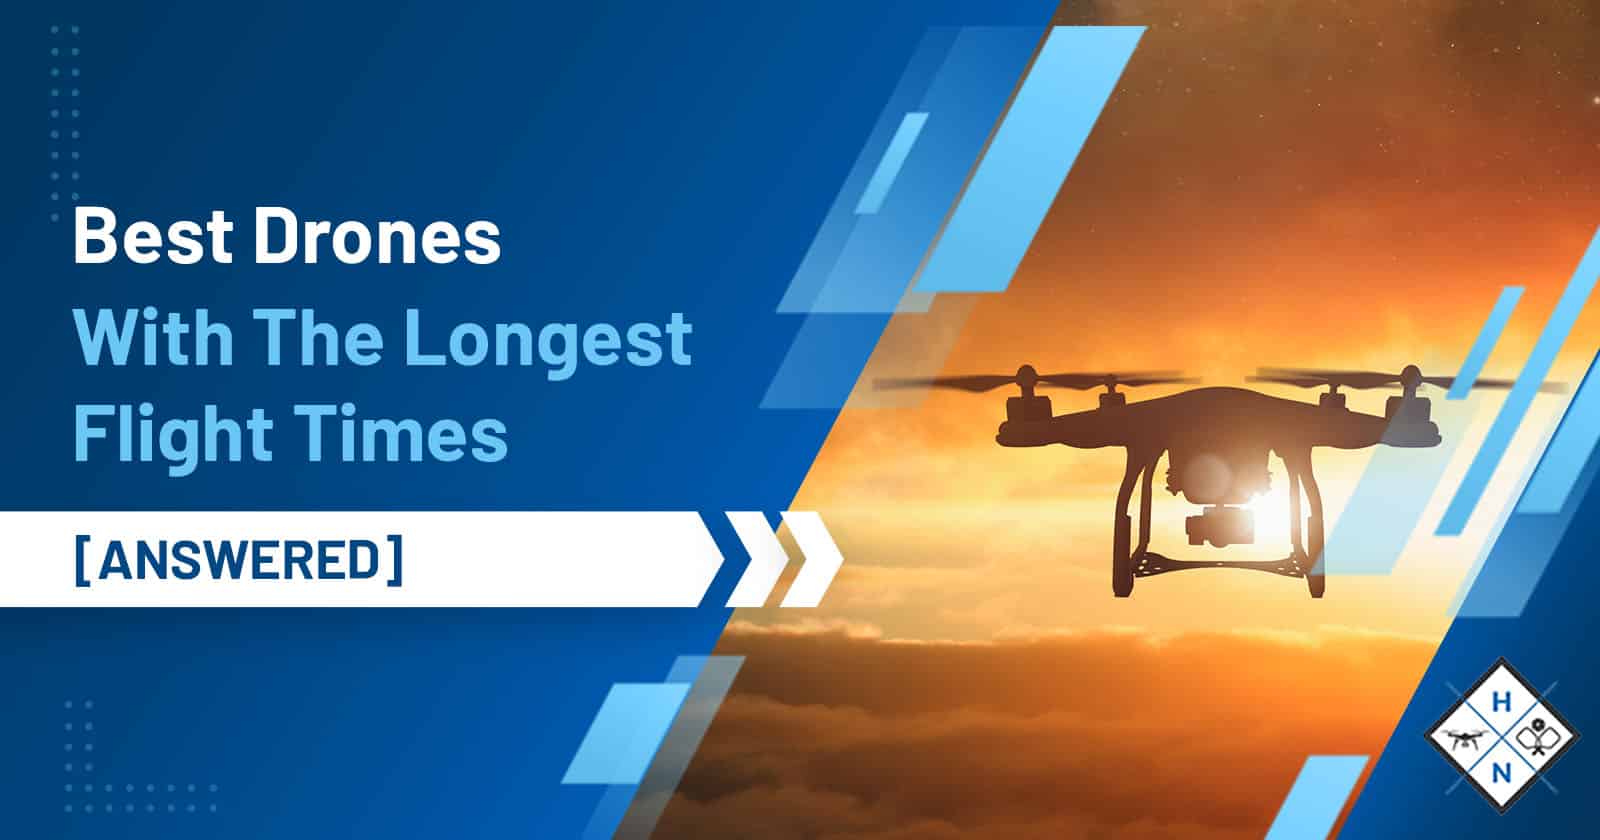 Best Drones With The Longest Flight Times [ANSWERED]